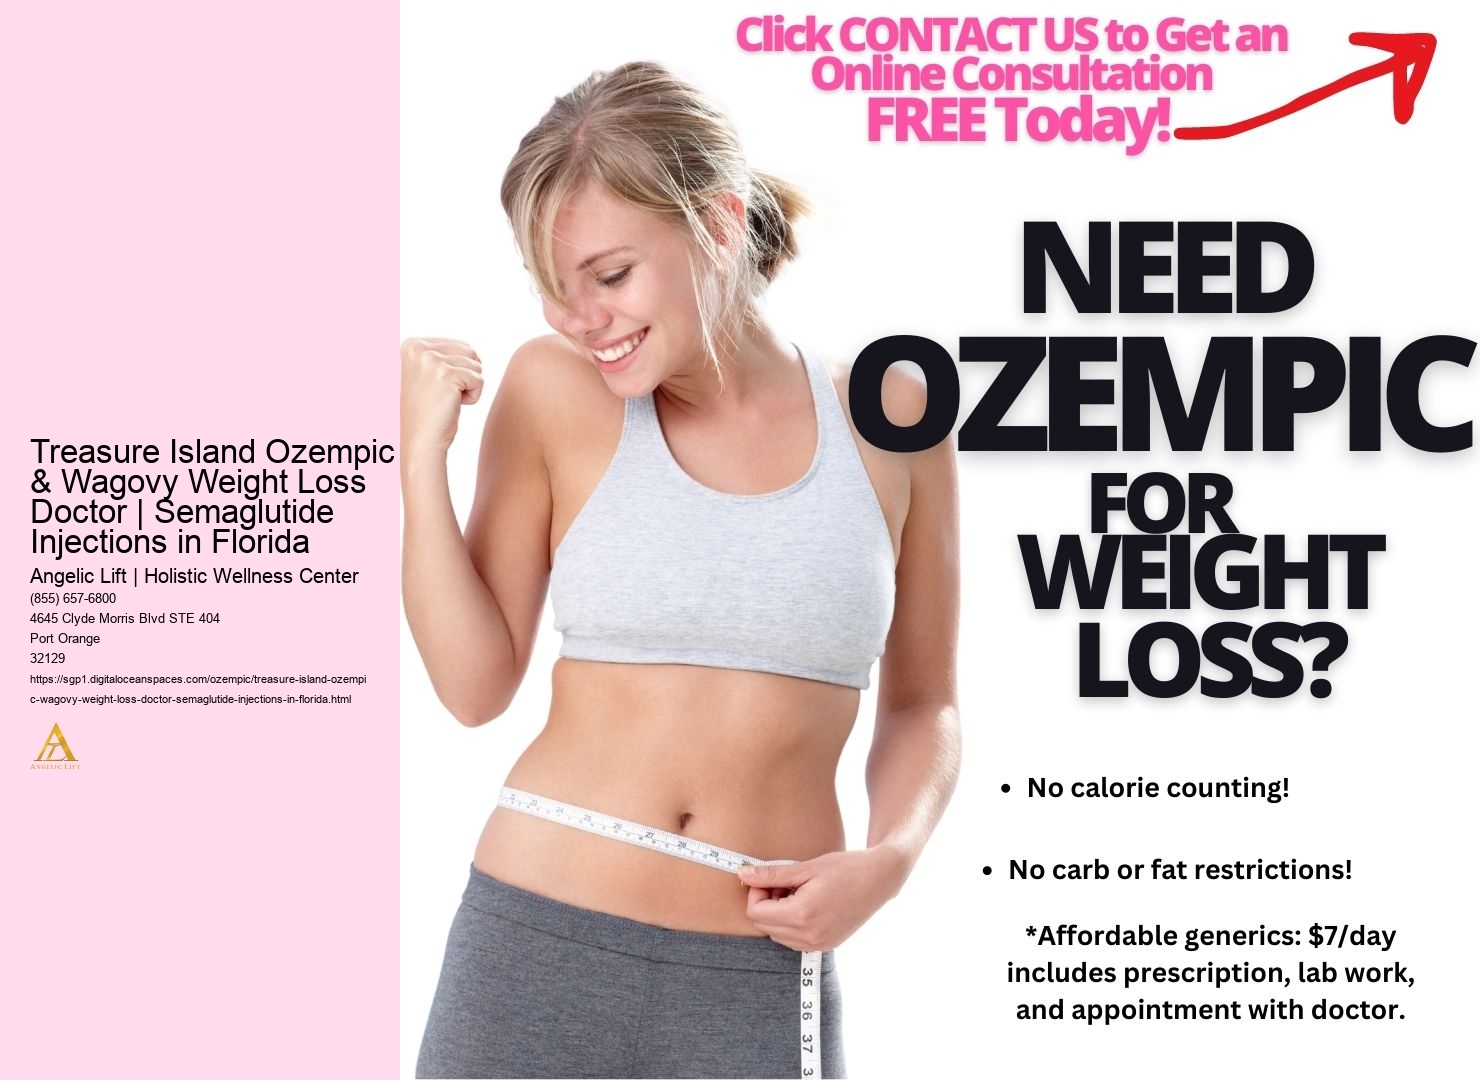 Treasure Island Ozempic & Wagovy Weight Loss Doctor | Semaglutide Injections in Florida